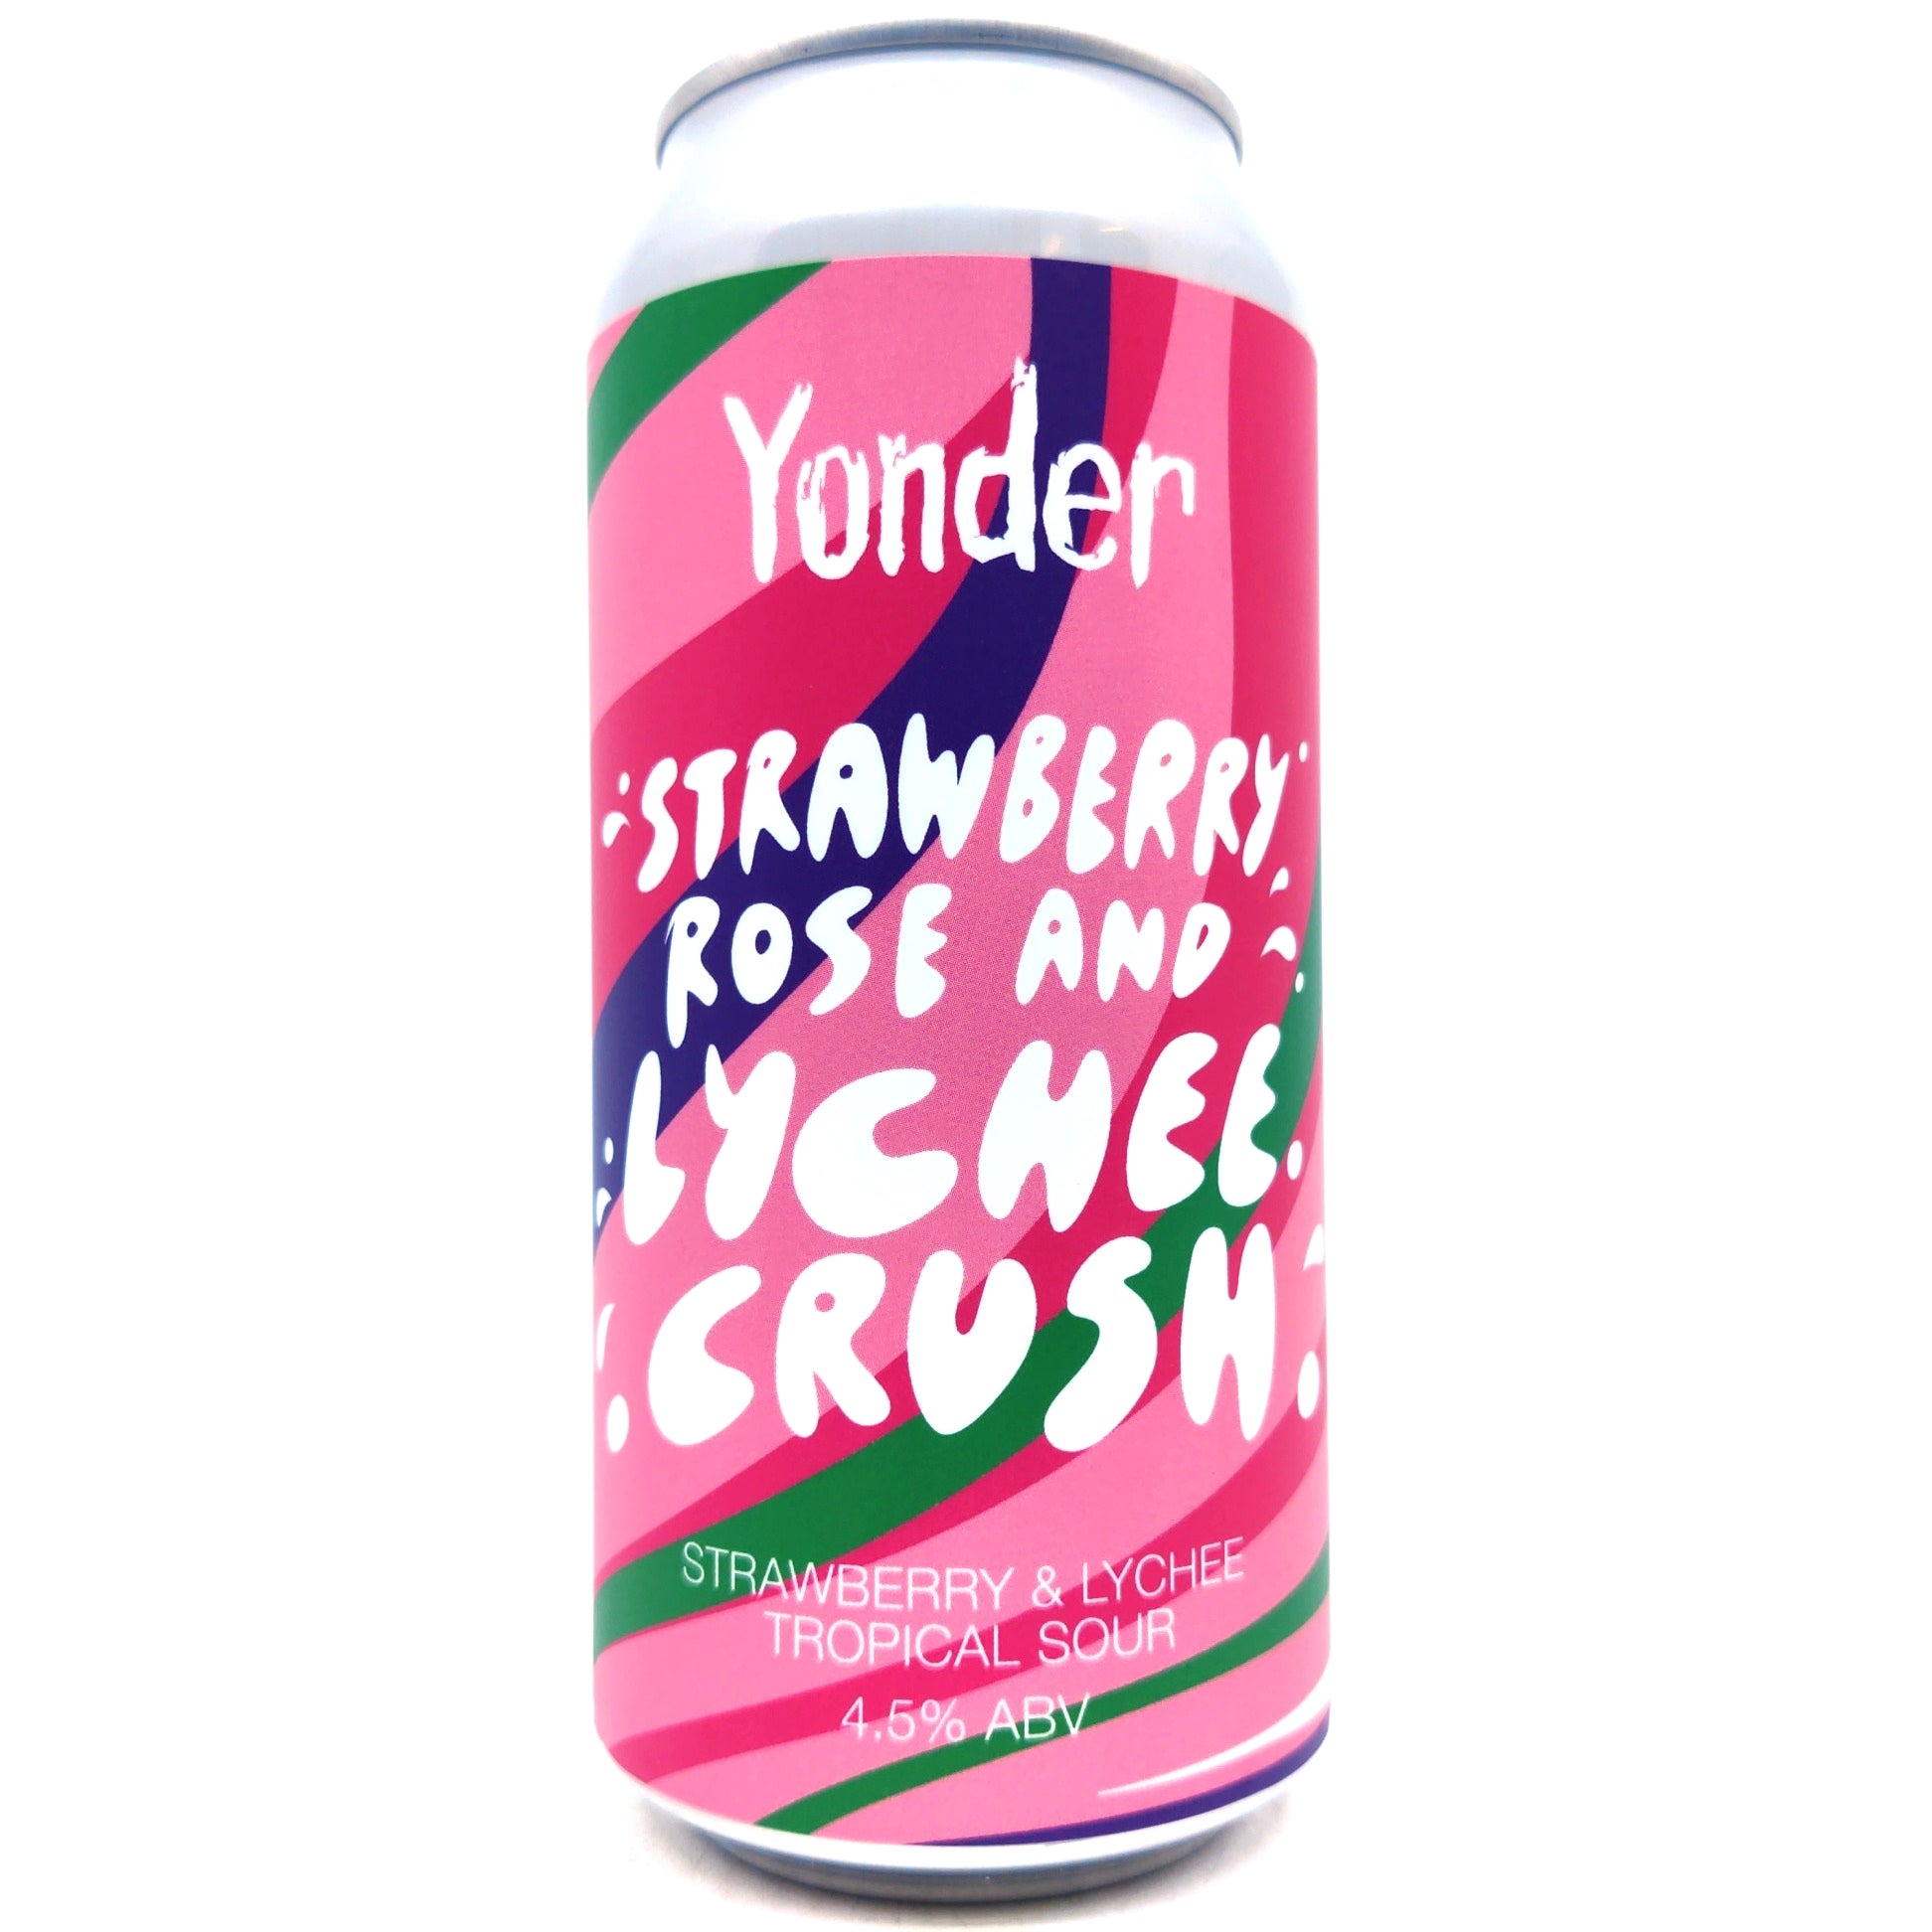 Yonder Strawberry Rose & Lychee Crush Tropical Sour 4.5% (440ml can)-Hop Burns & Black